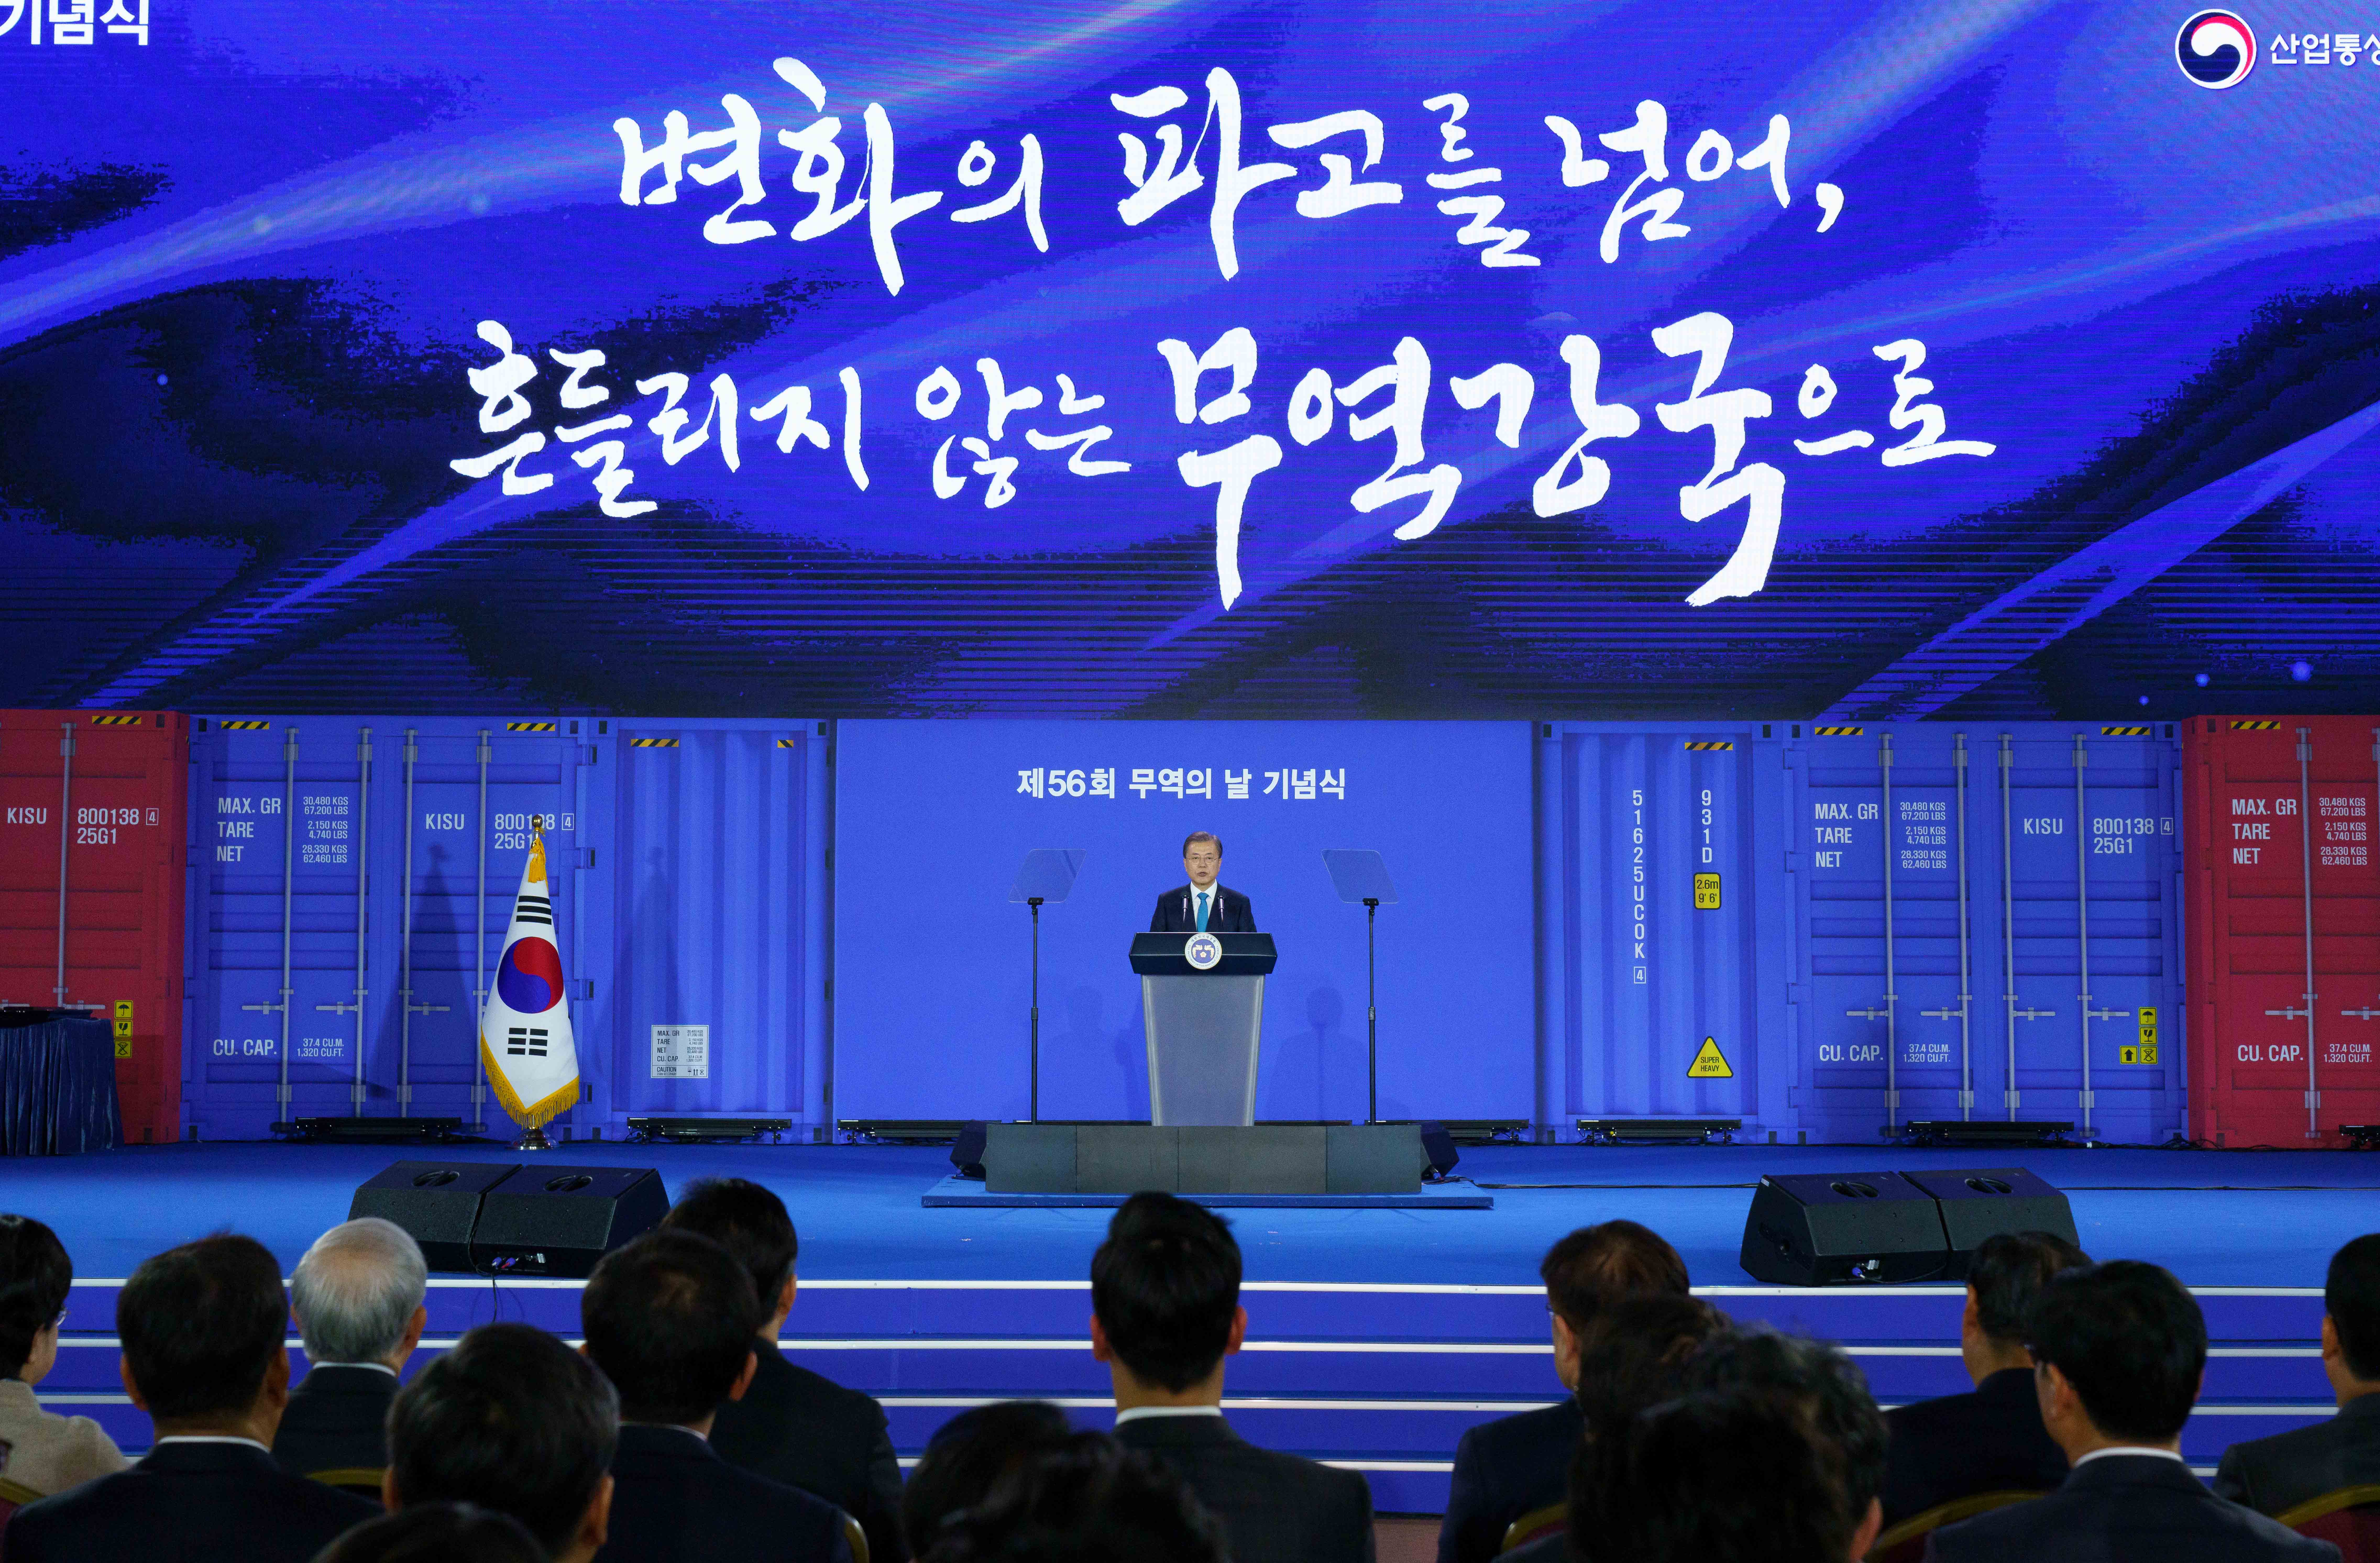 President Moon Jae-in on Dec. 5 gives a speech at the 2019 Trade Day ceremony held at Seoul's Convention and Exhibition Center (COEX). Hyoja-dong Studio